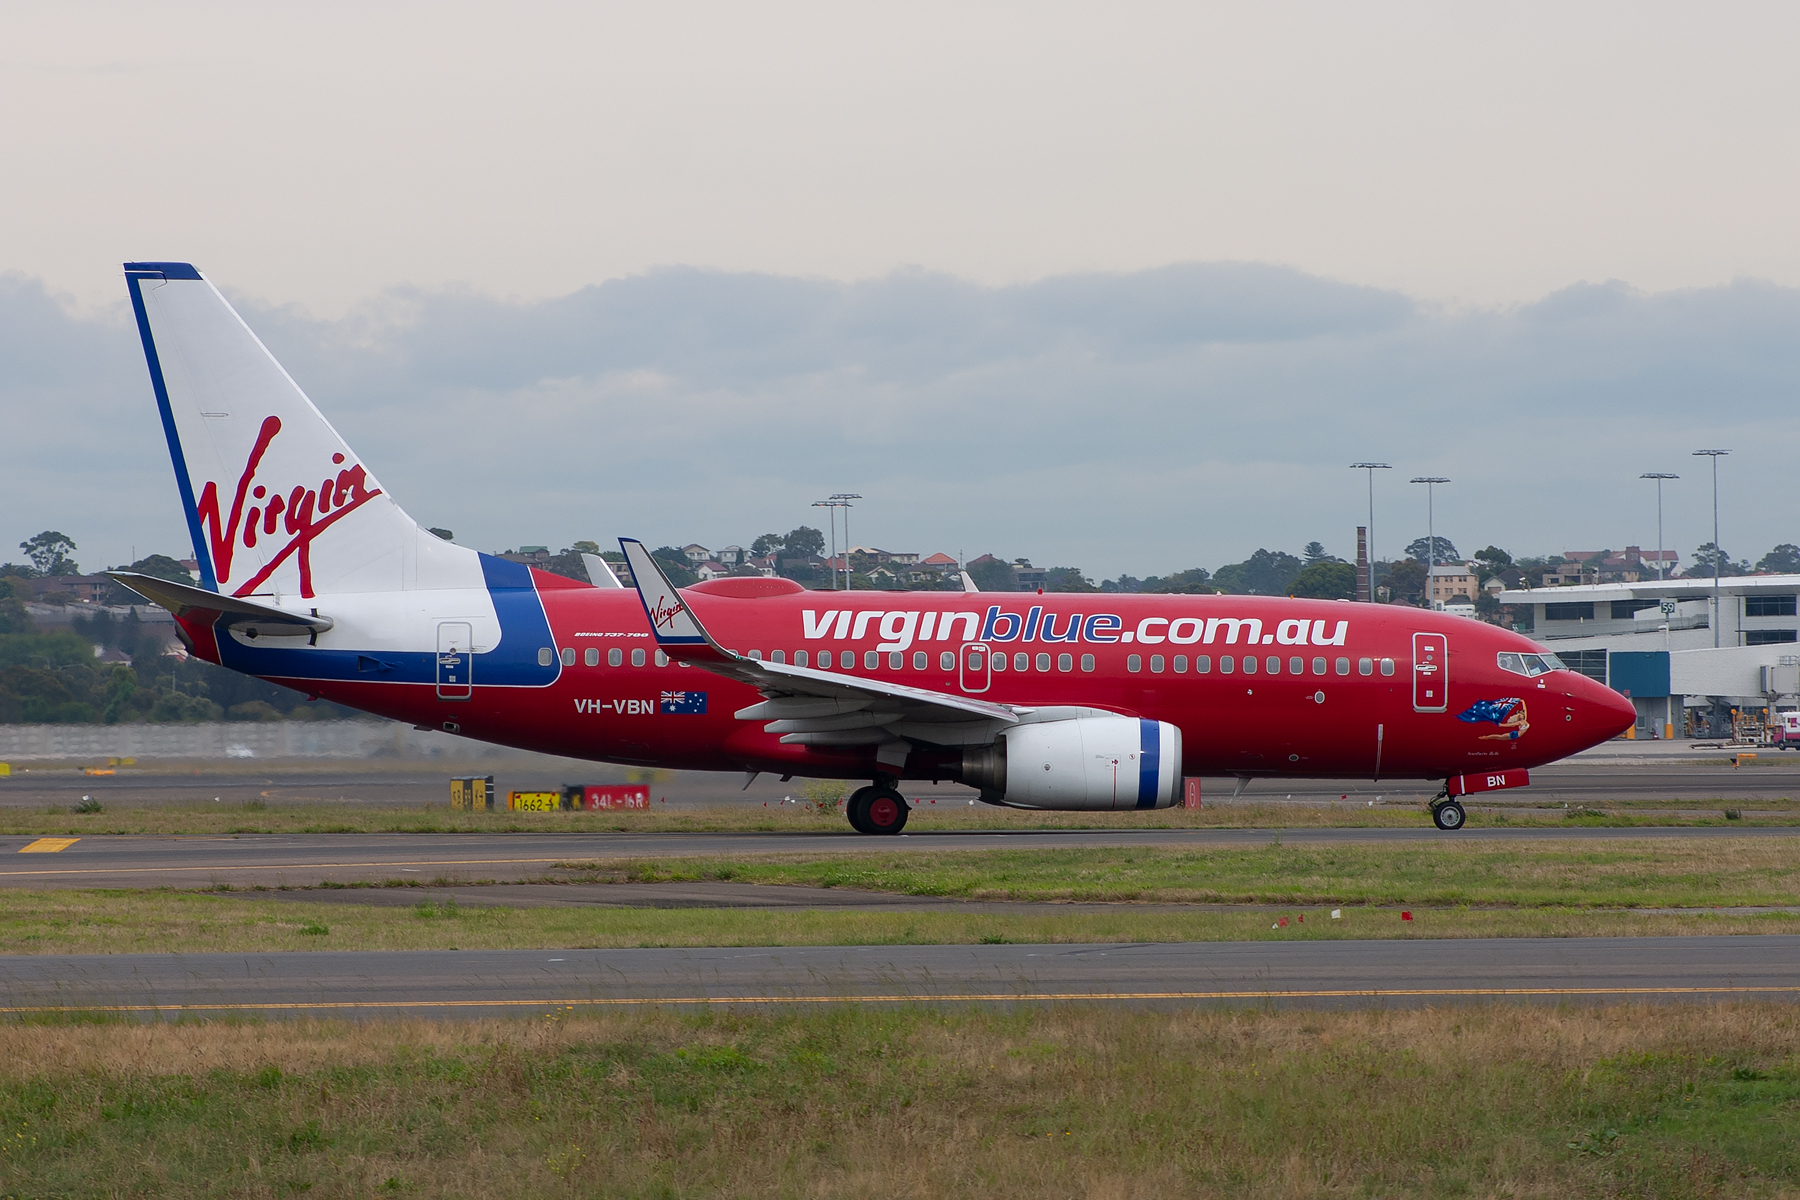 Virgin Blue Airlines Boeing 737-700 VH-VBN at Kingsford Smith